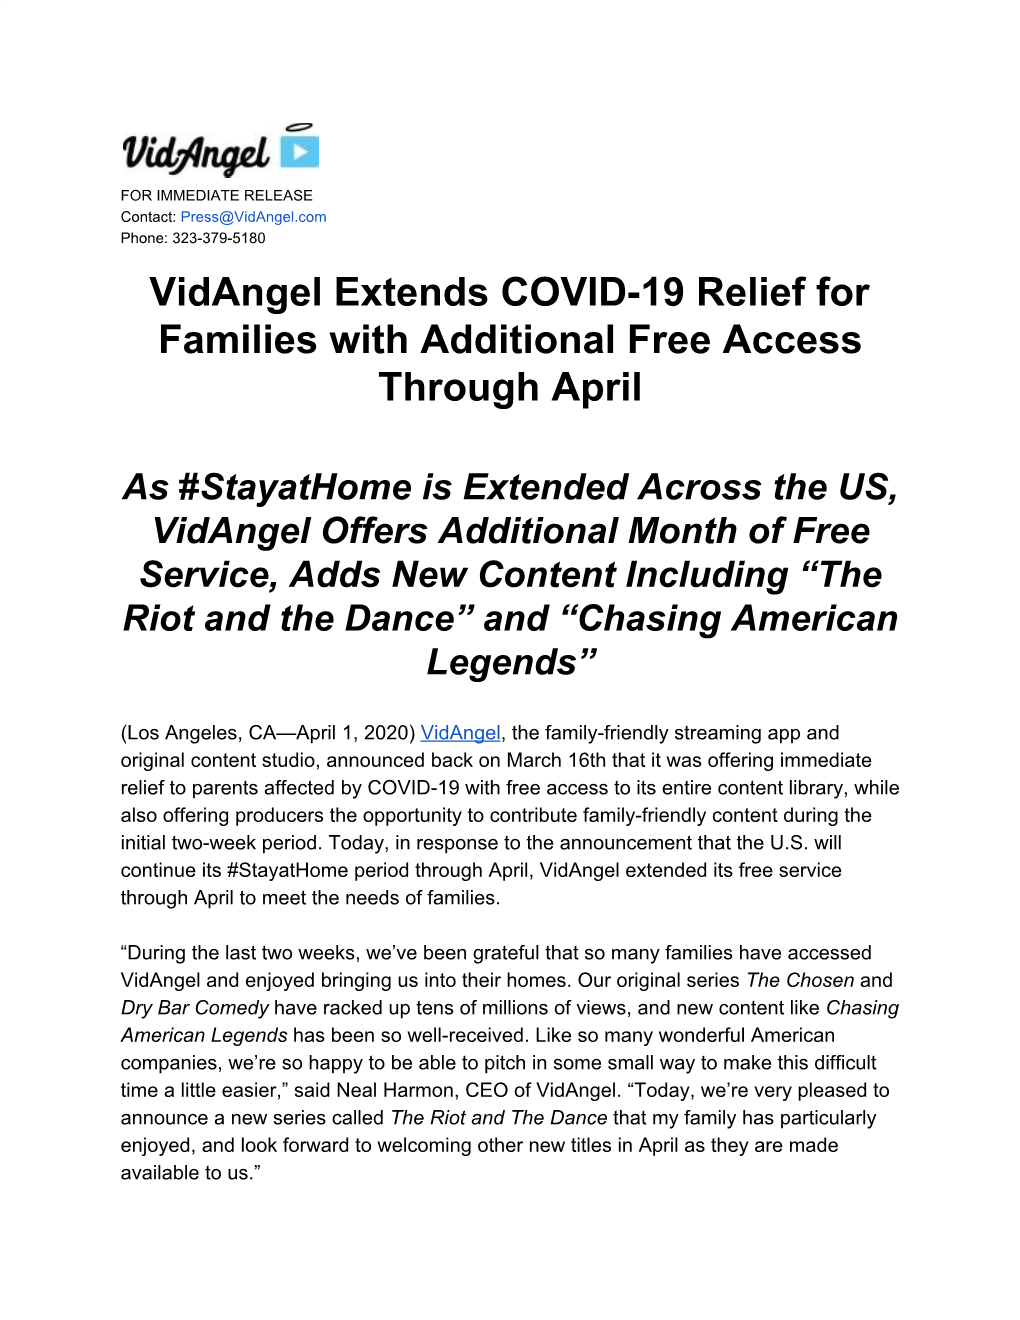 Vidangel Extends COVID-19 Relief for Families with Additional Free Access Through April